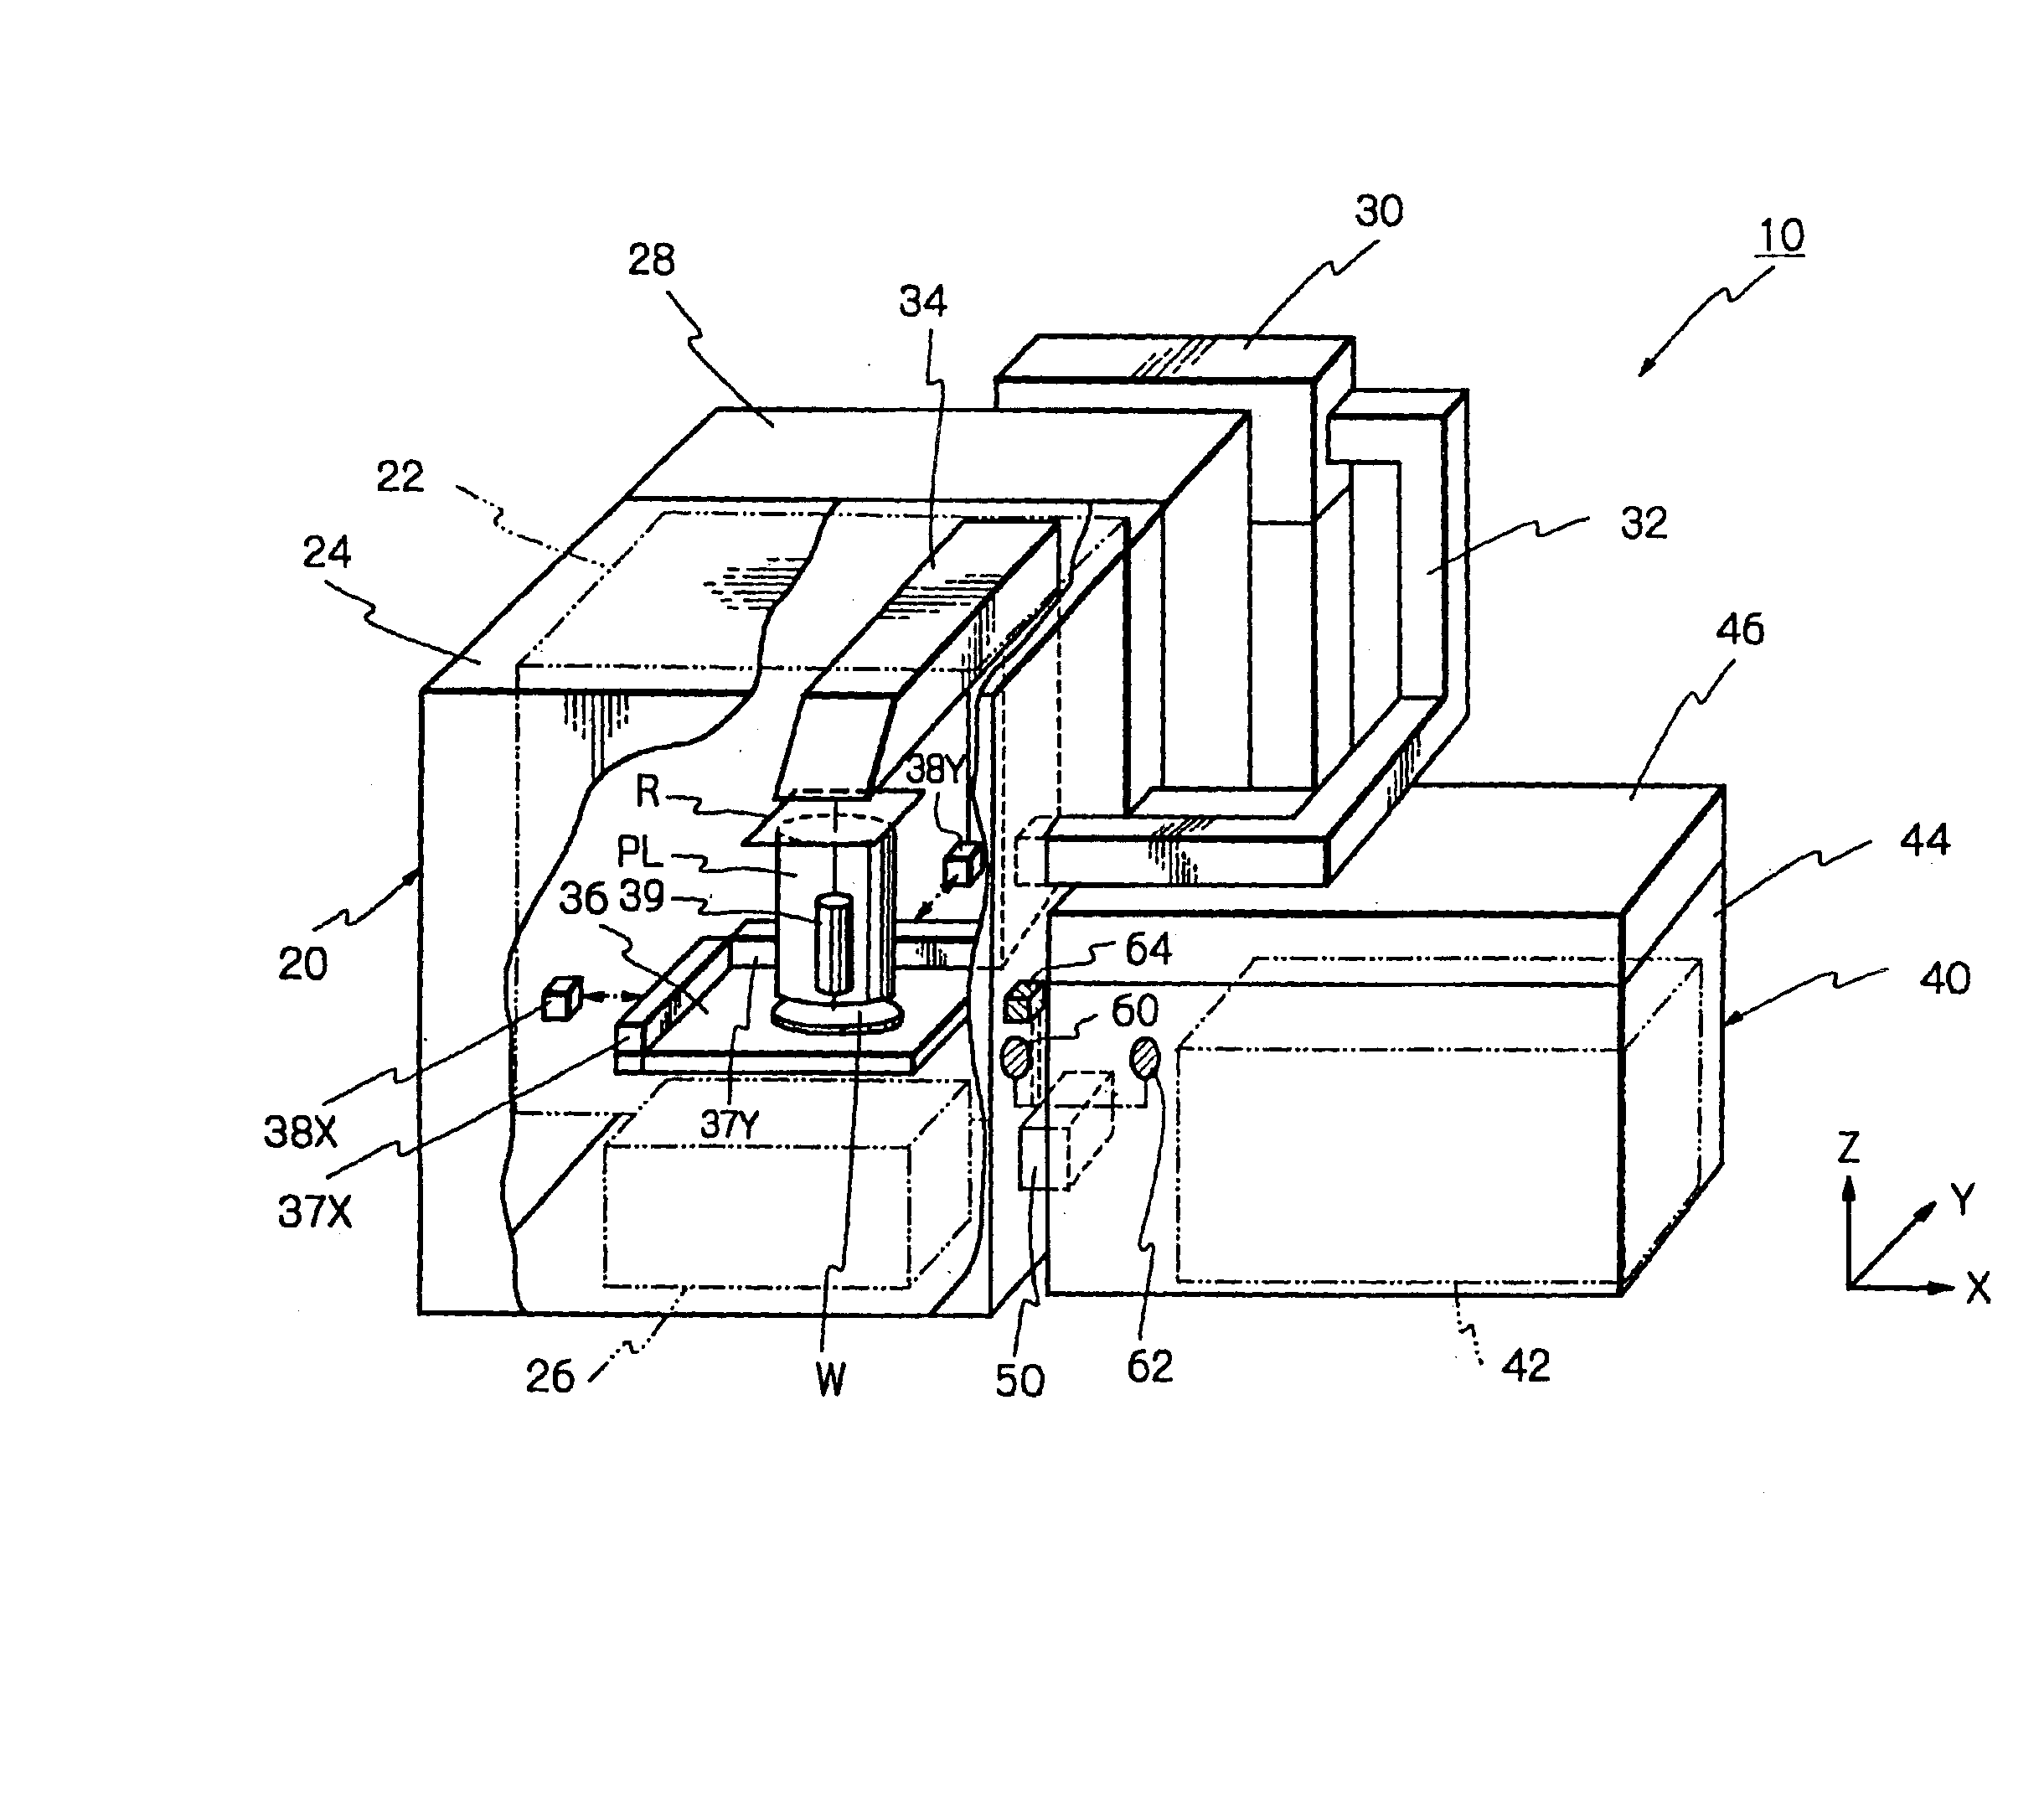 Lithography system and method